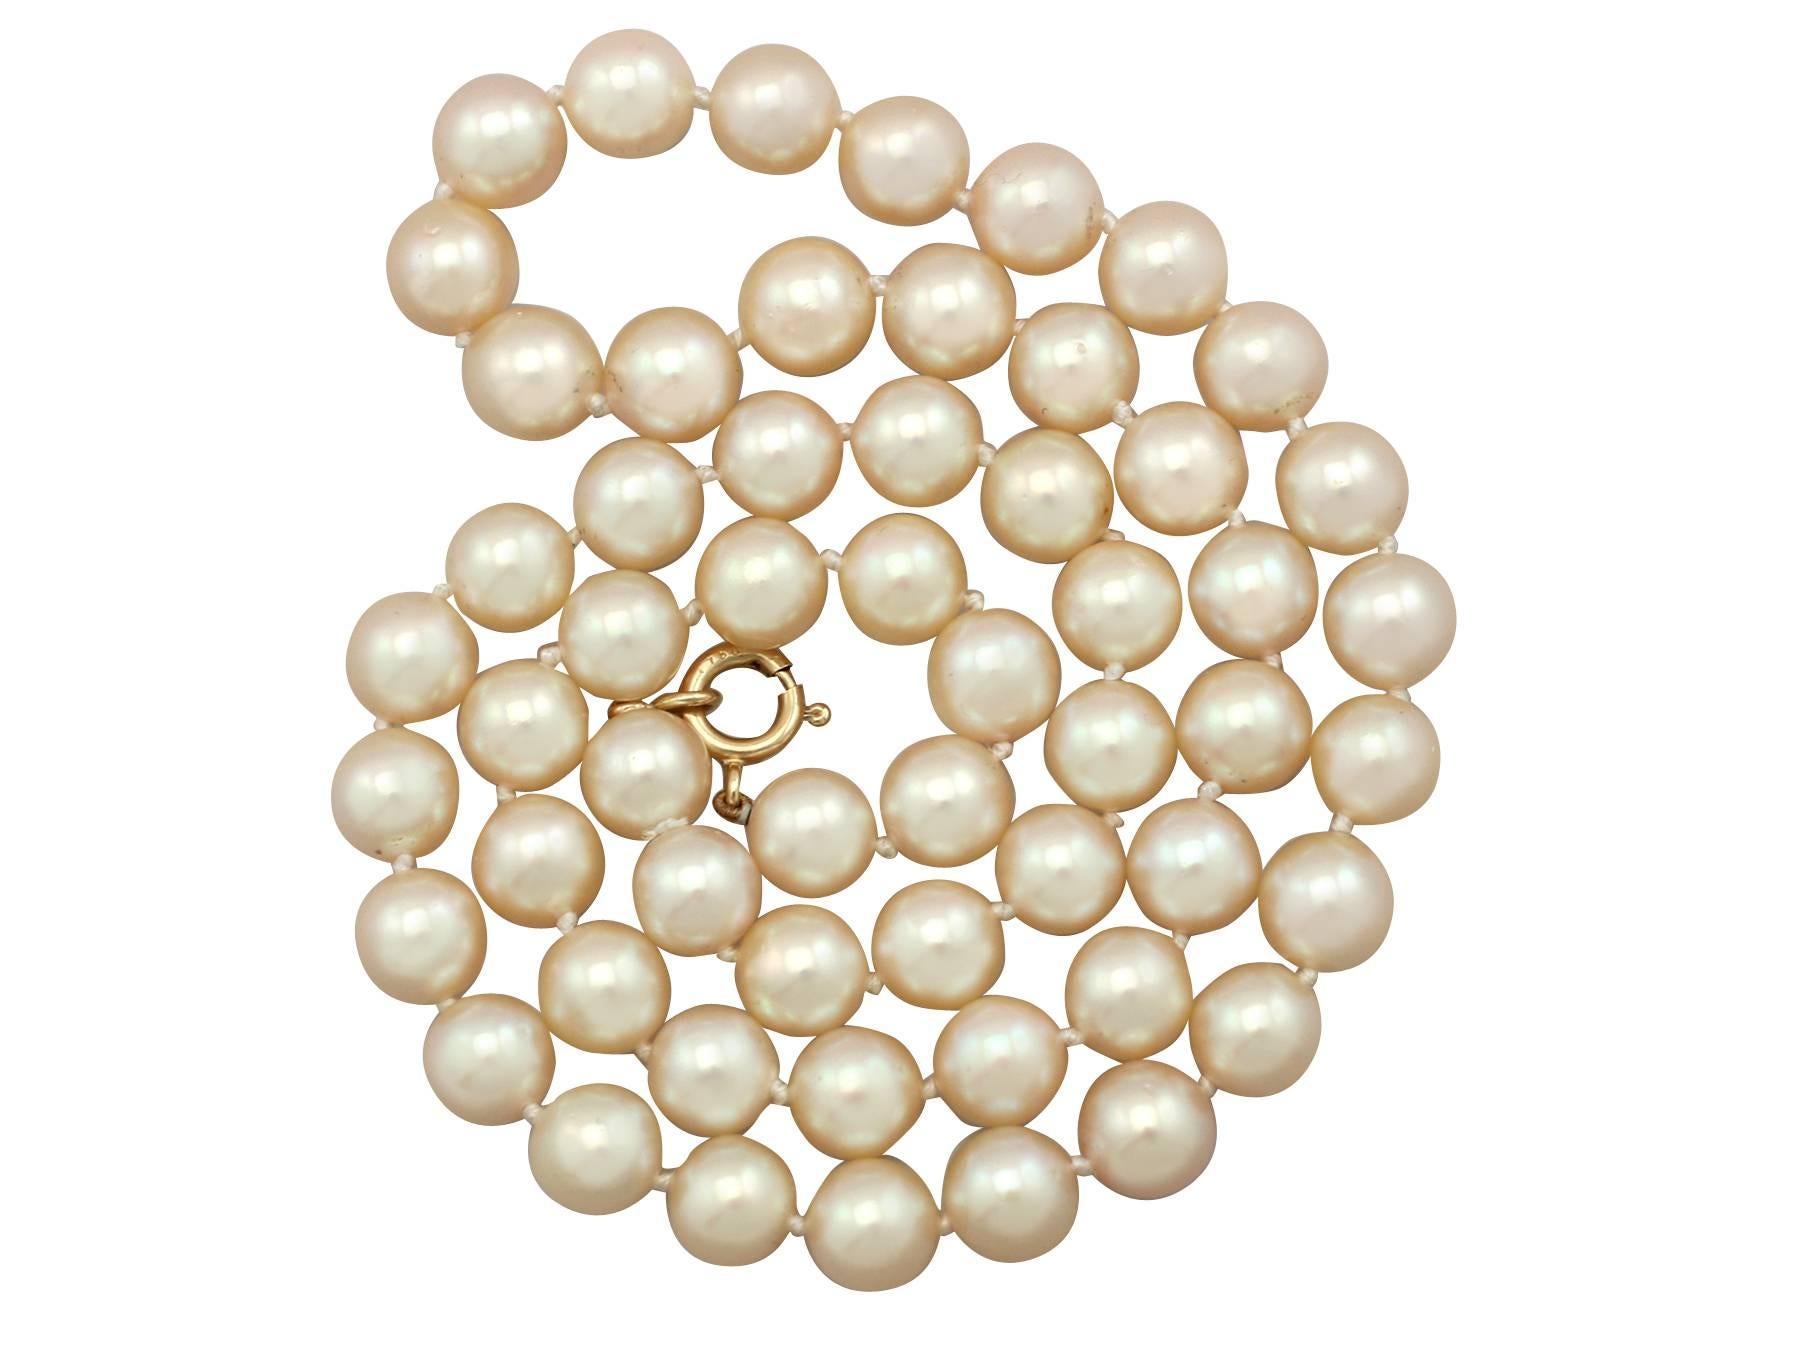 A fine and impressive single strand cultured pearl necklace with an 18 karat yellow gold clasp; part of our diverse vintage jewelry and estate jewelry collections.

This fine and impressive vintage single strand pearl necklace consists of fifty-six